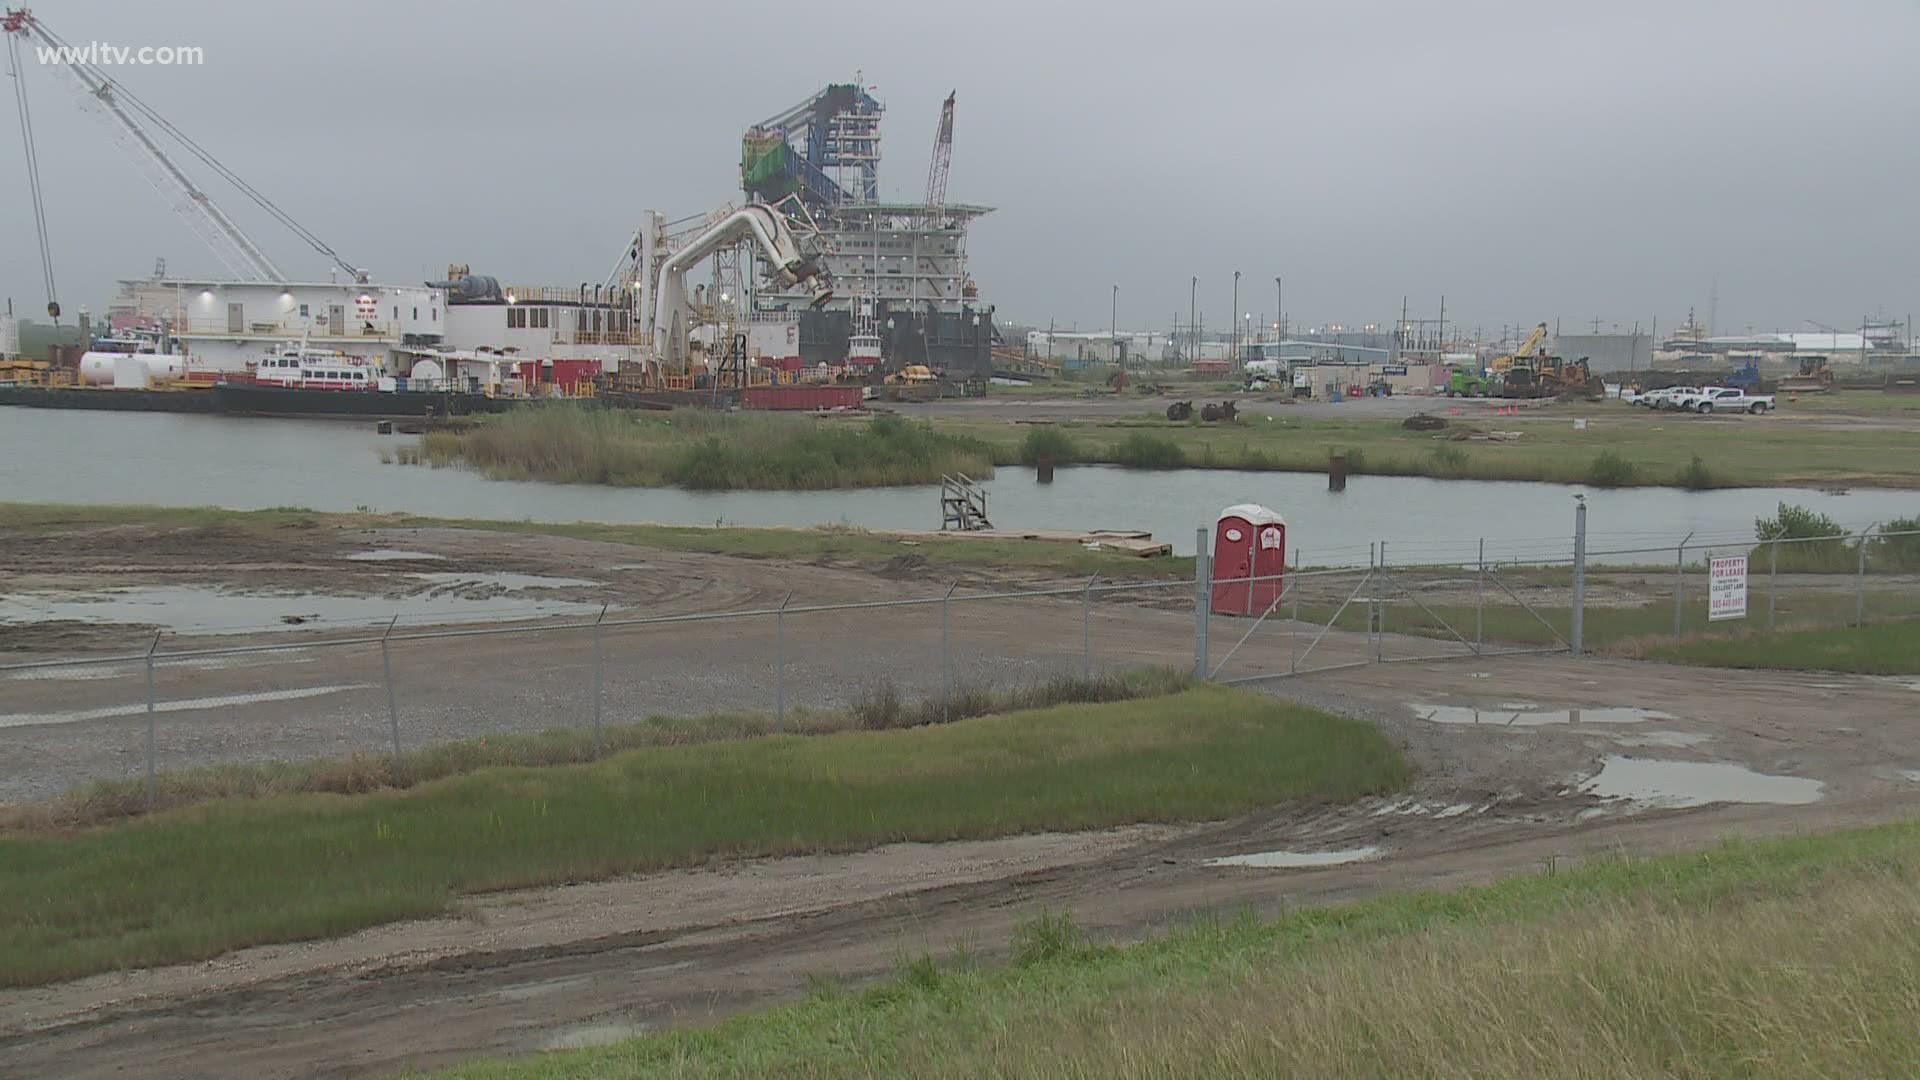 From industrial docks to homes on pilings, Port Fourchon, the economic driver of Lafourche Parish is shutting down again, for another storm.